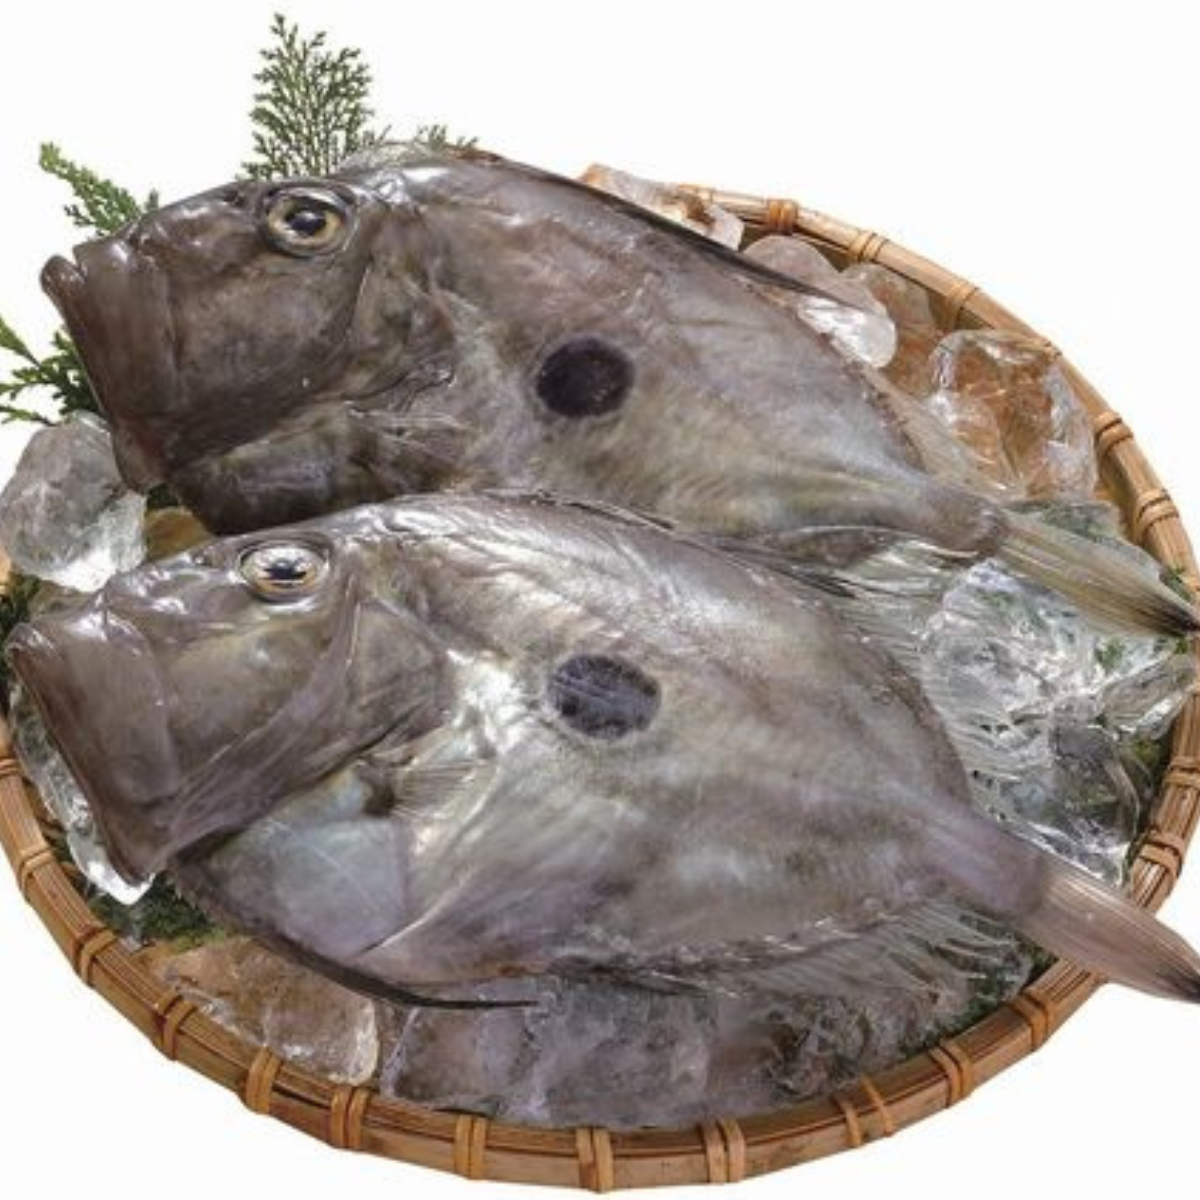 Two John Dory fishes